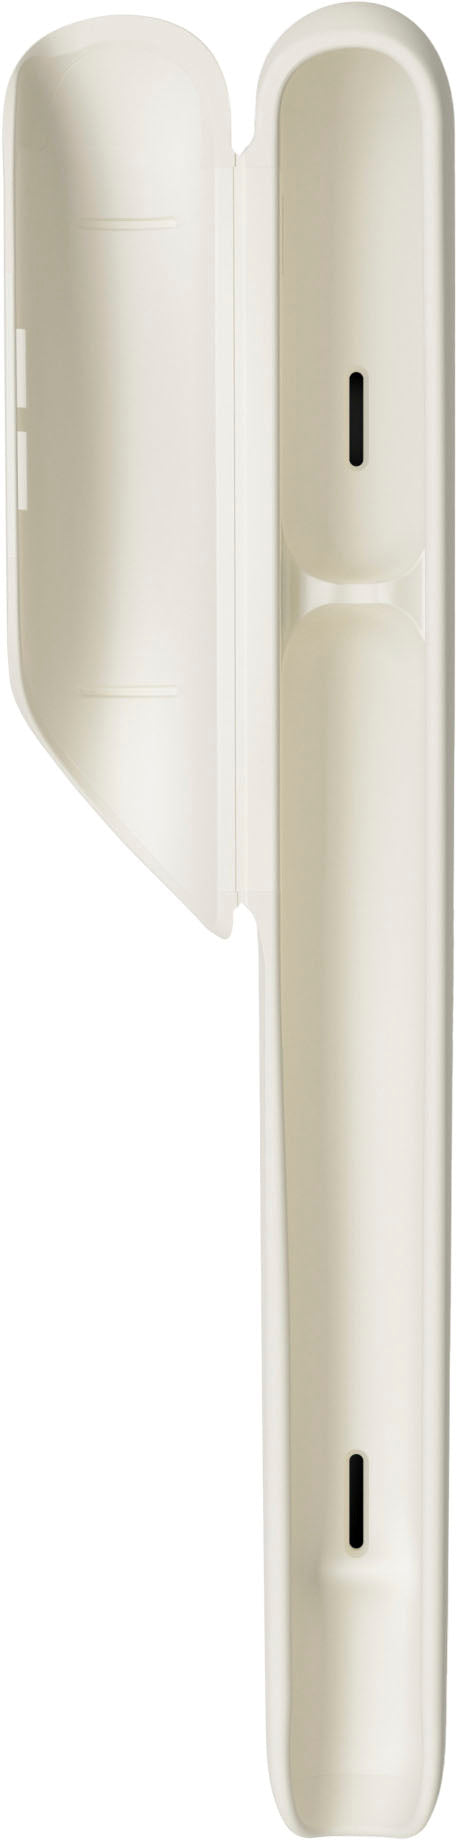 Philips One by Sonicare Rechargeable Toothbrush, Snow, HY1200/27 - Snow_15